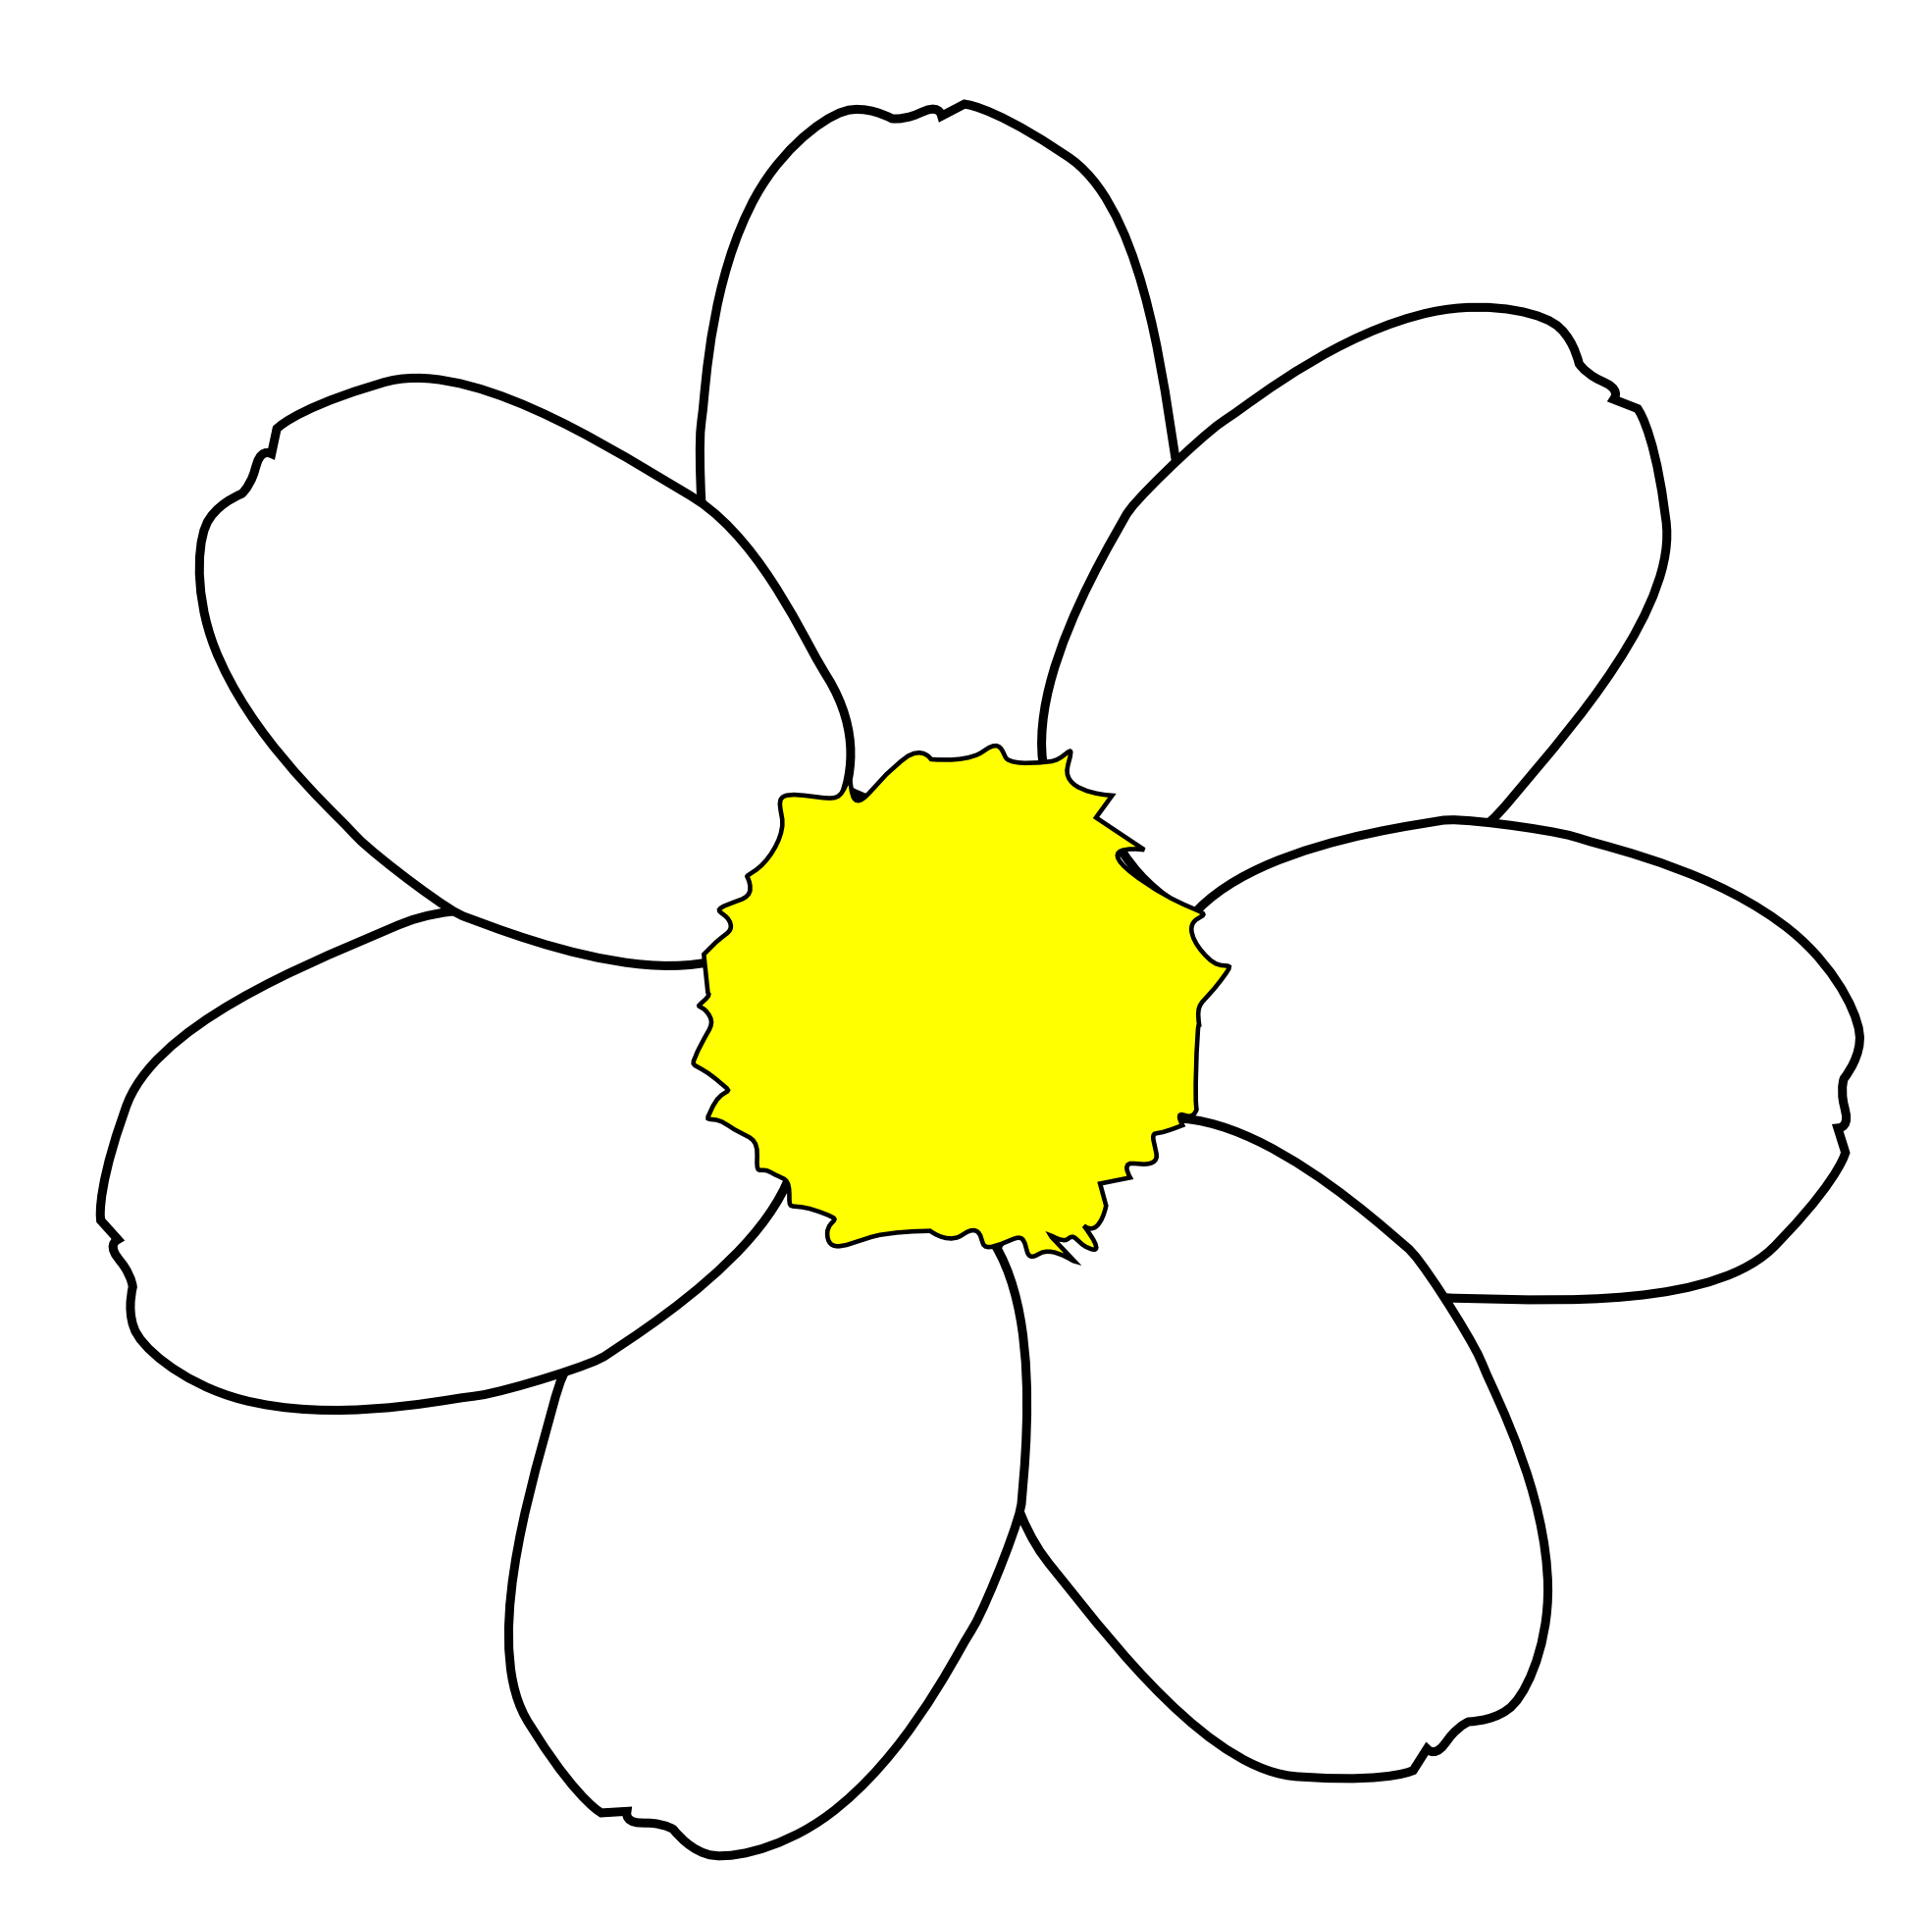 daisy-flower-outline-free-download-on-clipartmag